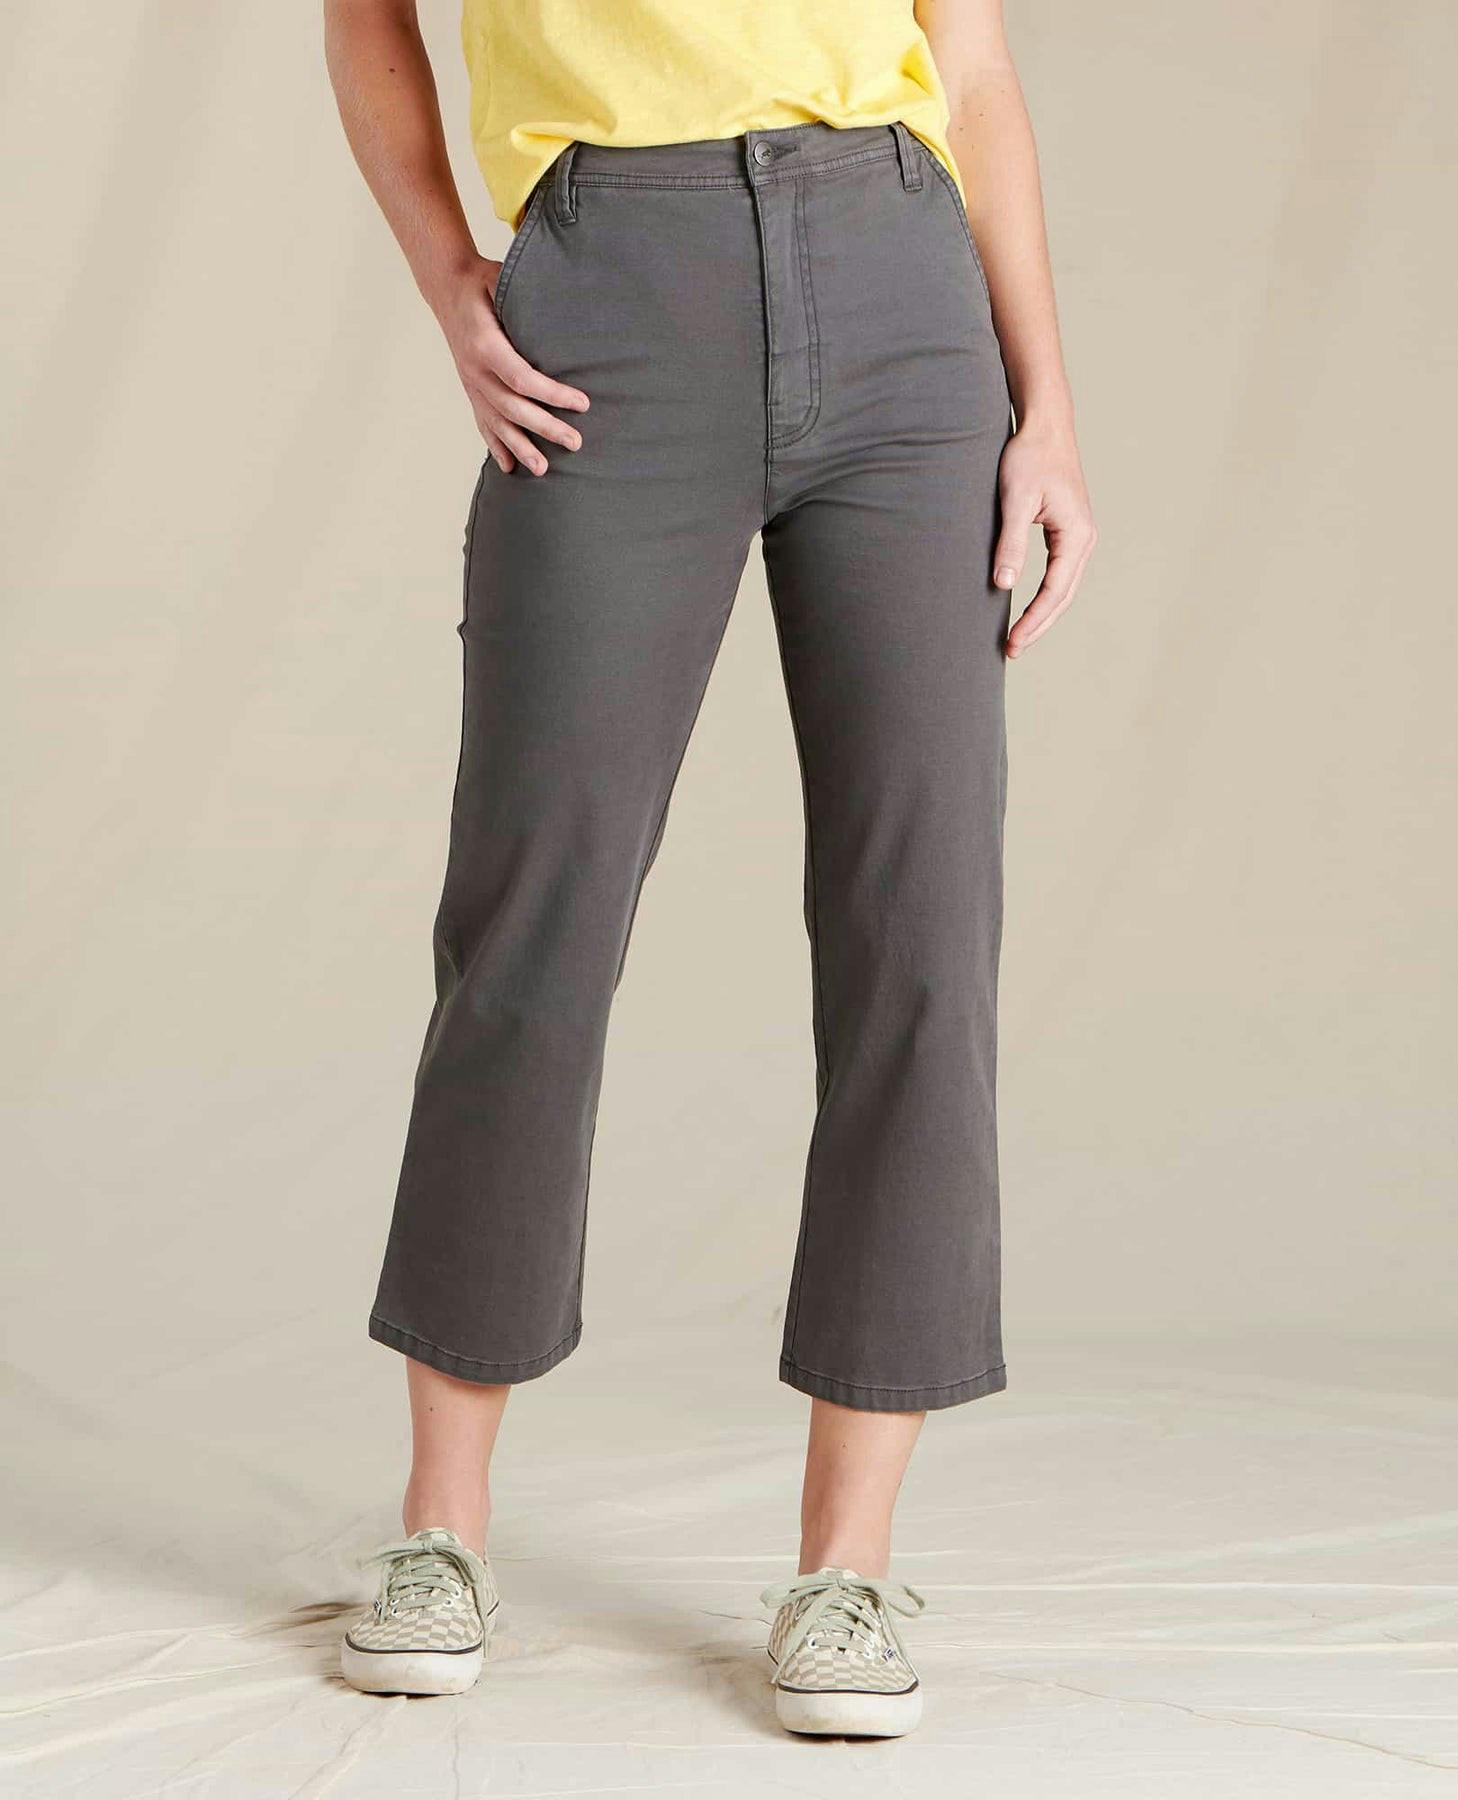 Toad and Co - Earthworks High Rise Pant - 8 Soot